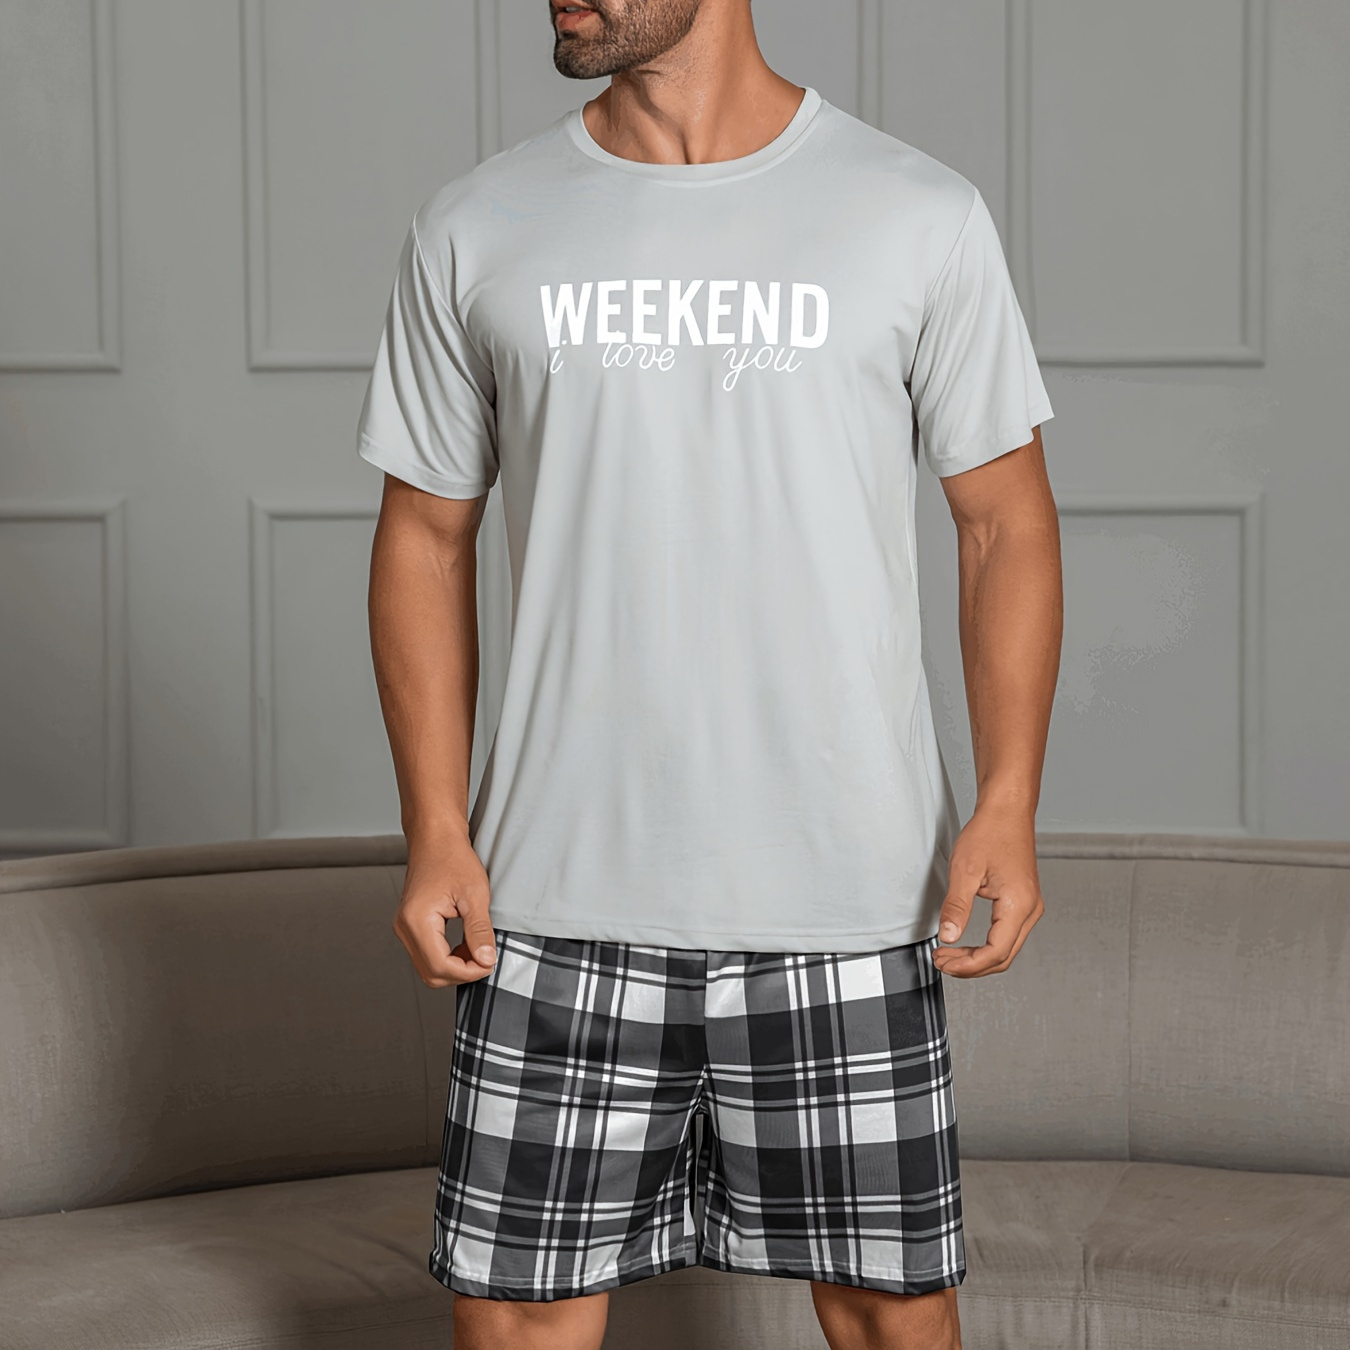 

Men's Summer Casual Grey Letter Print Short Sleeve T-shirt & Plaid Shorts Pajama Set, Soft Comfortable Sleep Set For Home And Outdoor Wearing